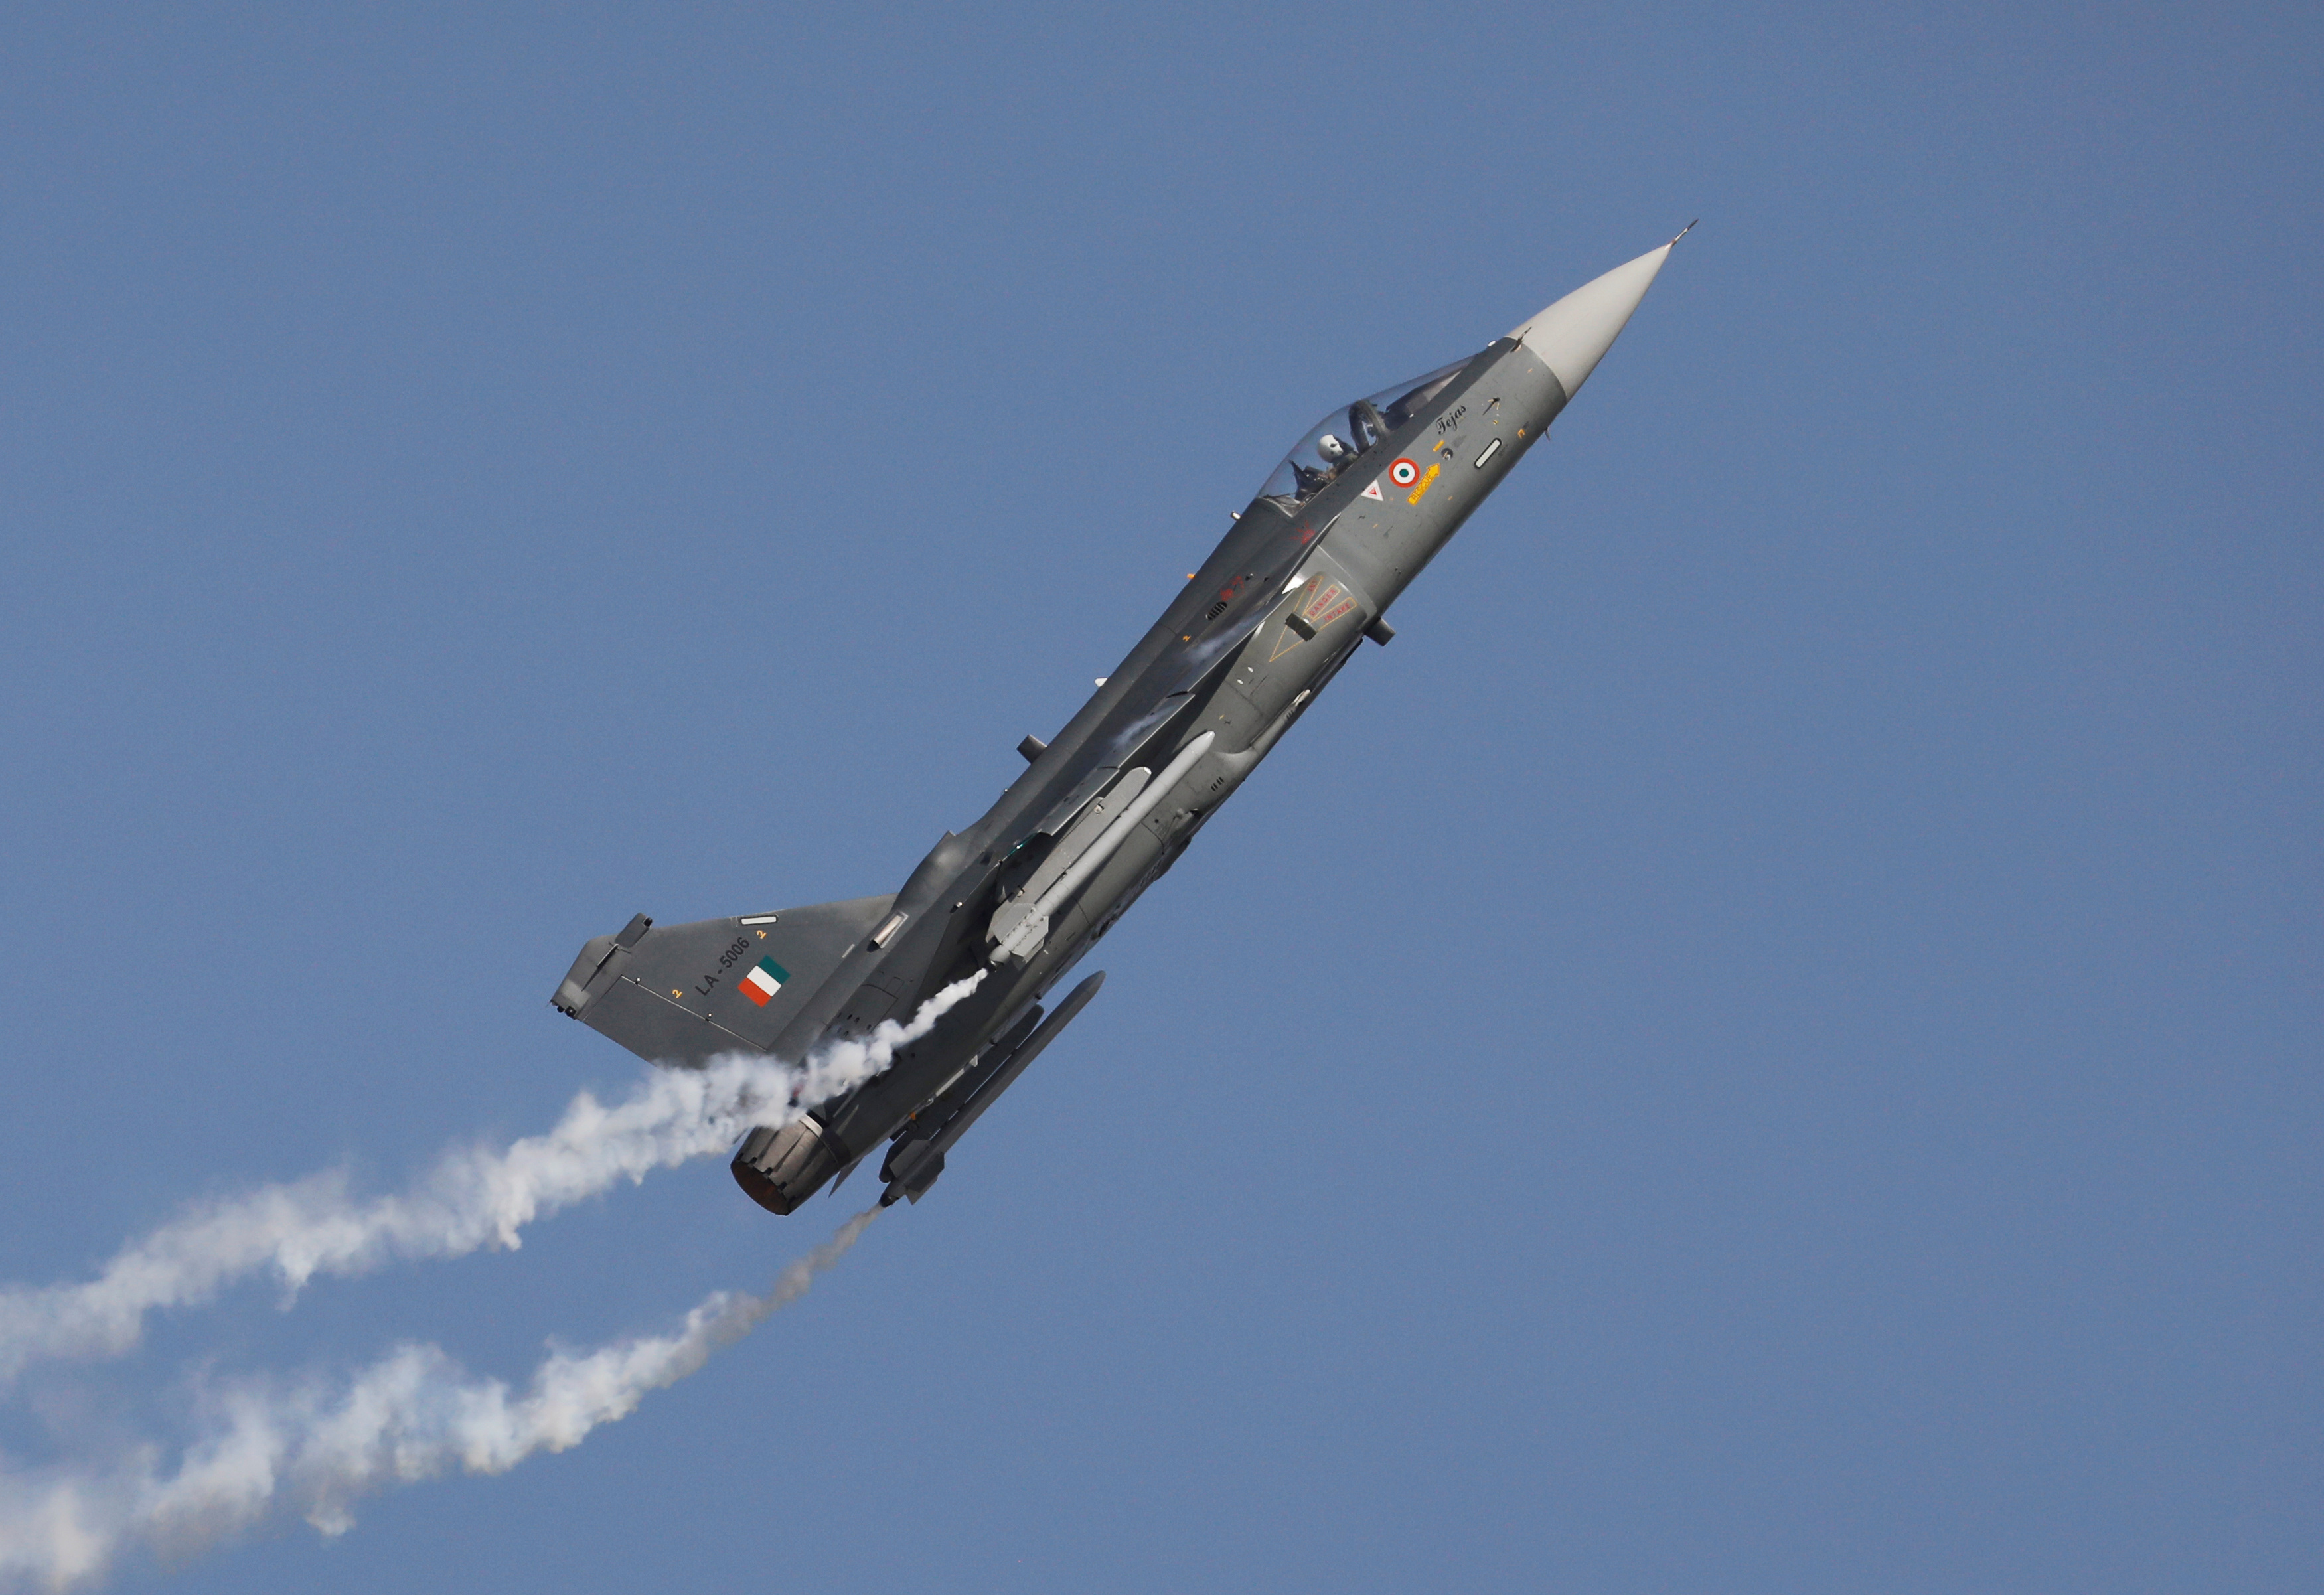 An Indian Air Force (IAF) light combat aircraft "Tejas" performs during the Indian Air Force Day celebrations at the Hindon Air Force Station on the outskirts of New Delhi